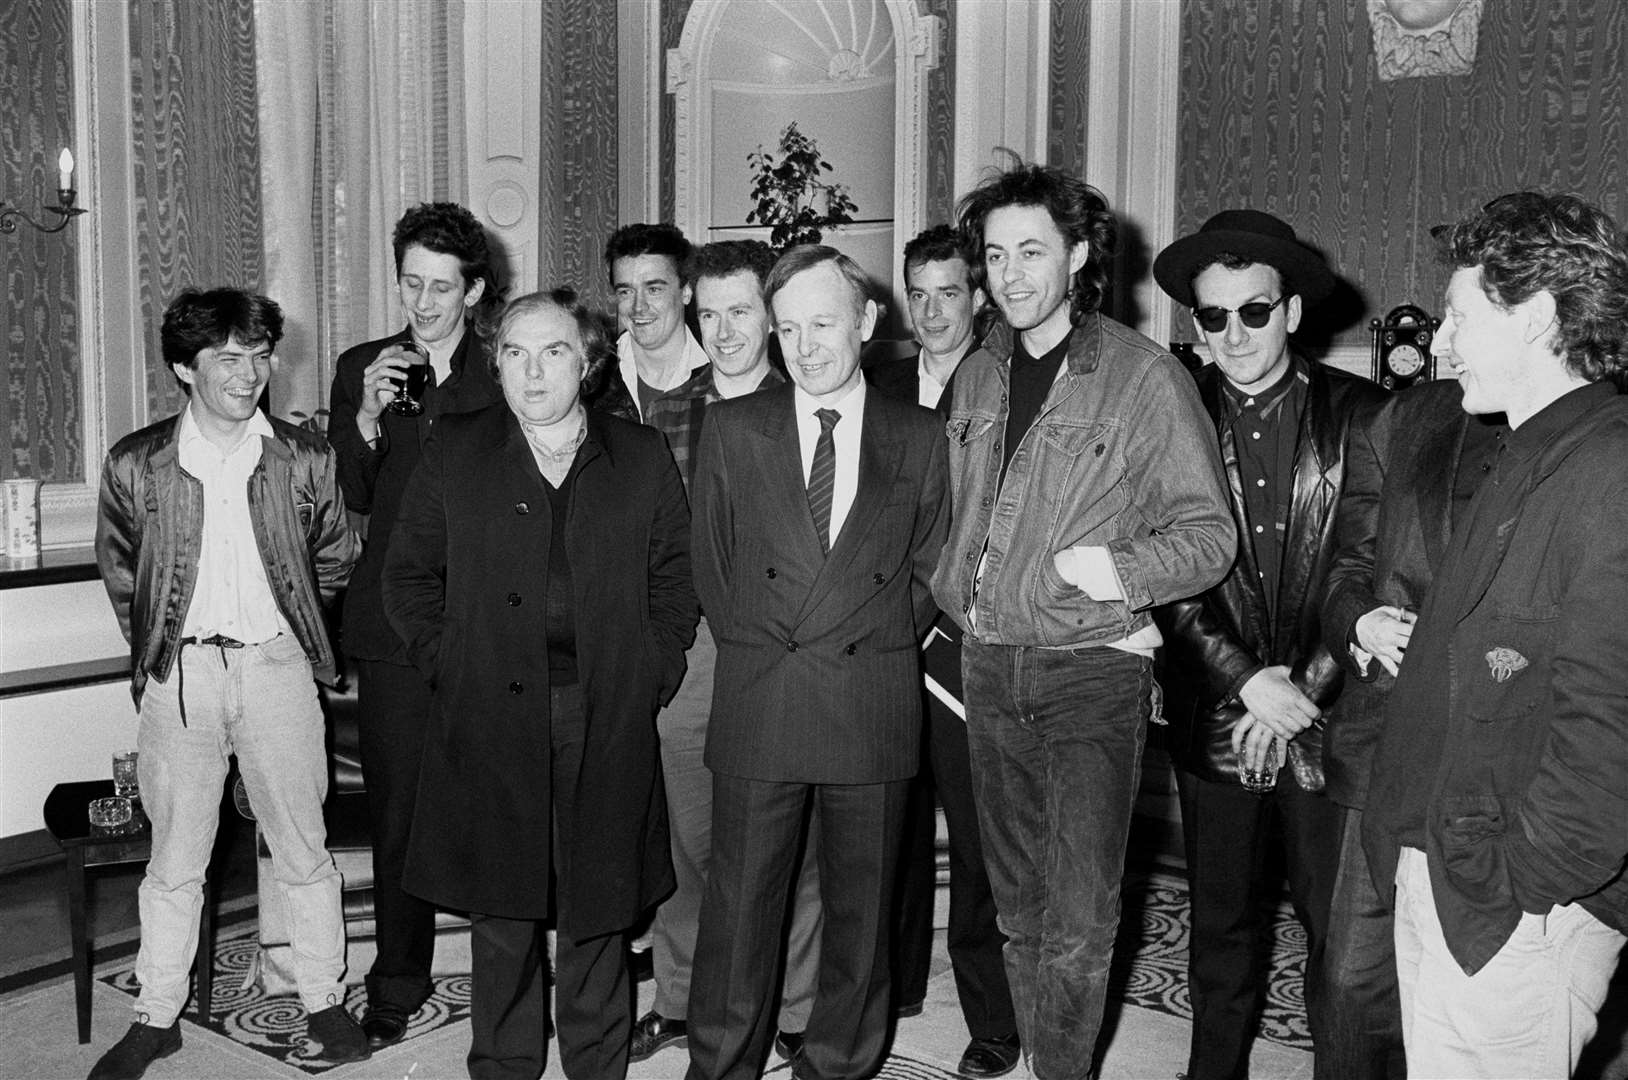 Pop stars fronted by Bob Geldof, at the Irish Embassy in London with Ambassador Noel Dorr. From left: Pete Briquette (Boomtown Rats), Shane MacGowan (The Pogues), Van Morrison, Spider Stacey, Jem Finer (both Pogues), Noel Dorr, James Fearnley (The Pogues), Bob Geldof, Elvis Costello, Cait O’Riordan (Pogues, hidden) and Paul Brady (PA)